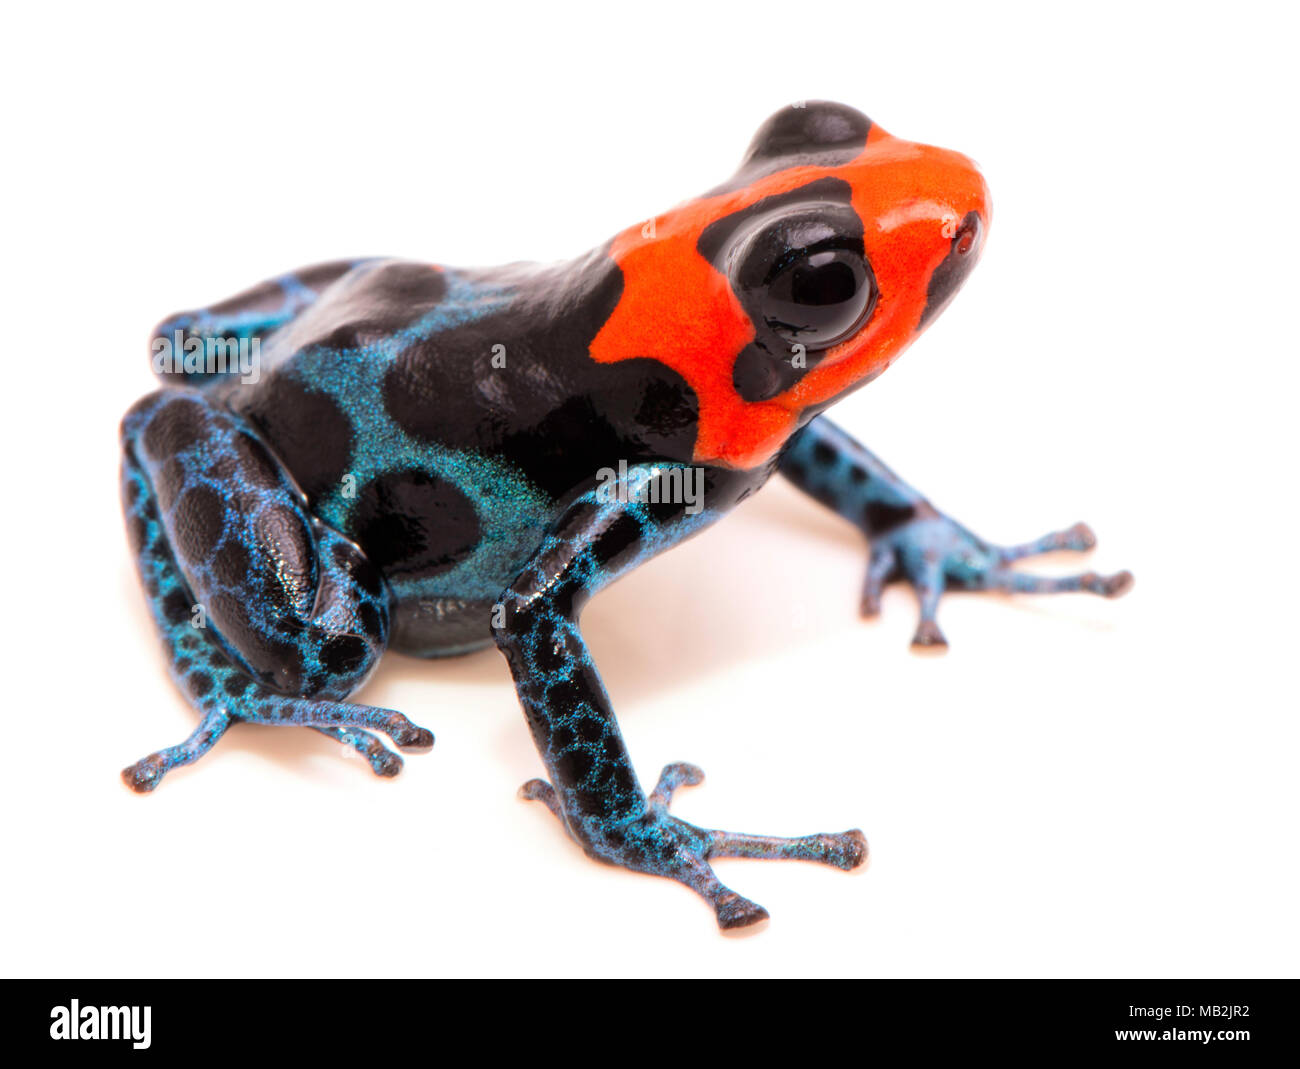 poison dart frog with red head, Ranitomeya benedicta. Poisonous rain forest  animal with bright warning colors. Isolated on white background Stock Photo  - Alamy